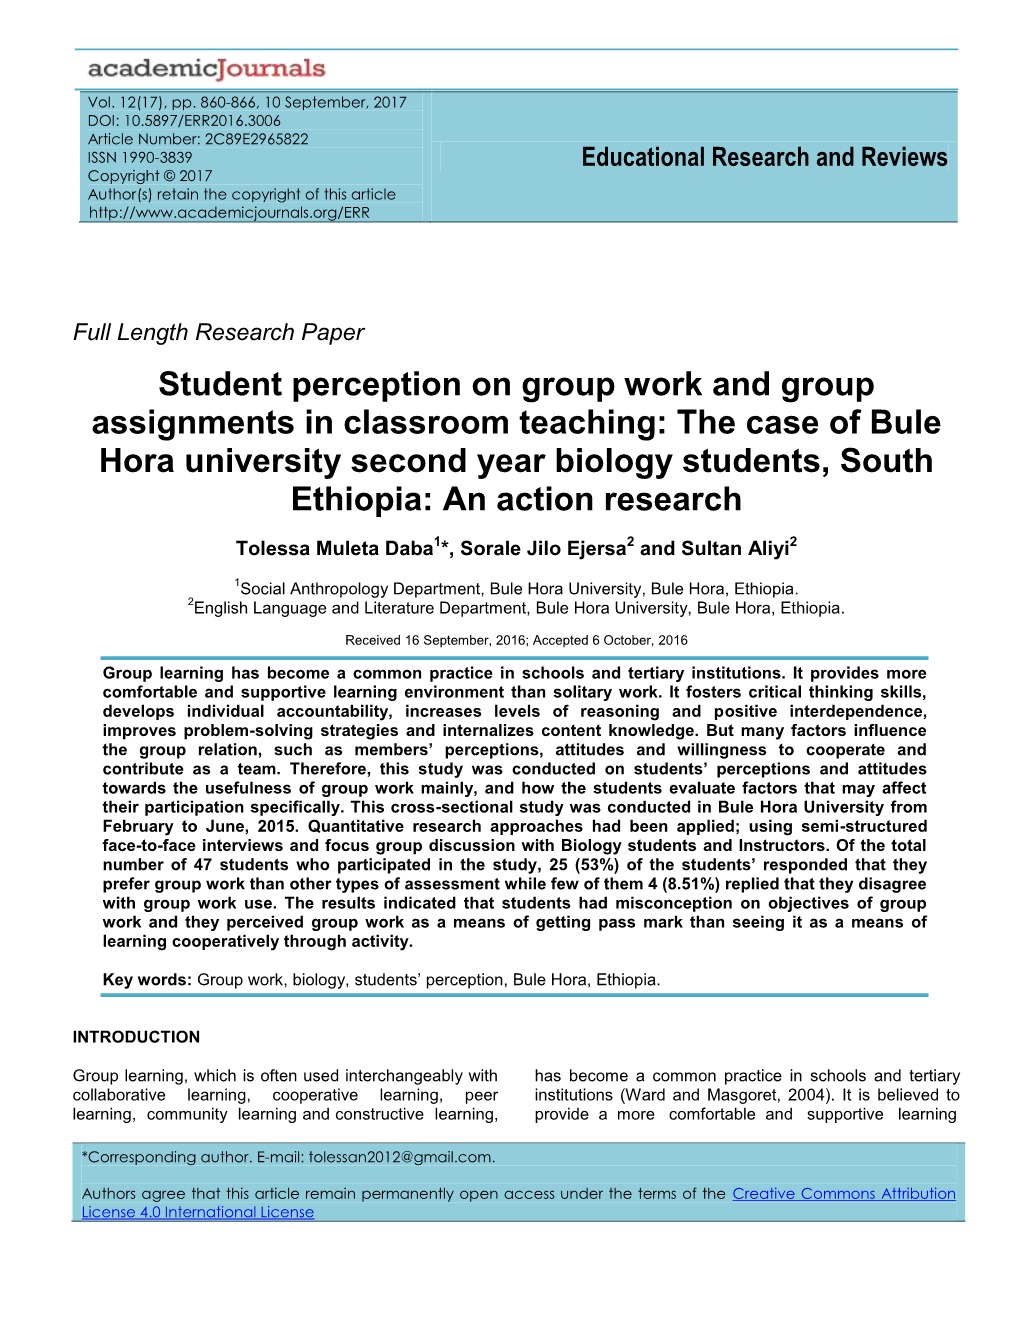 Student Perception on Group Work and Group Assignments In